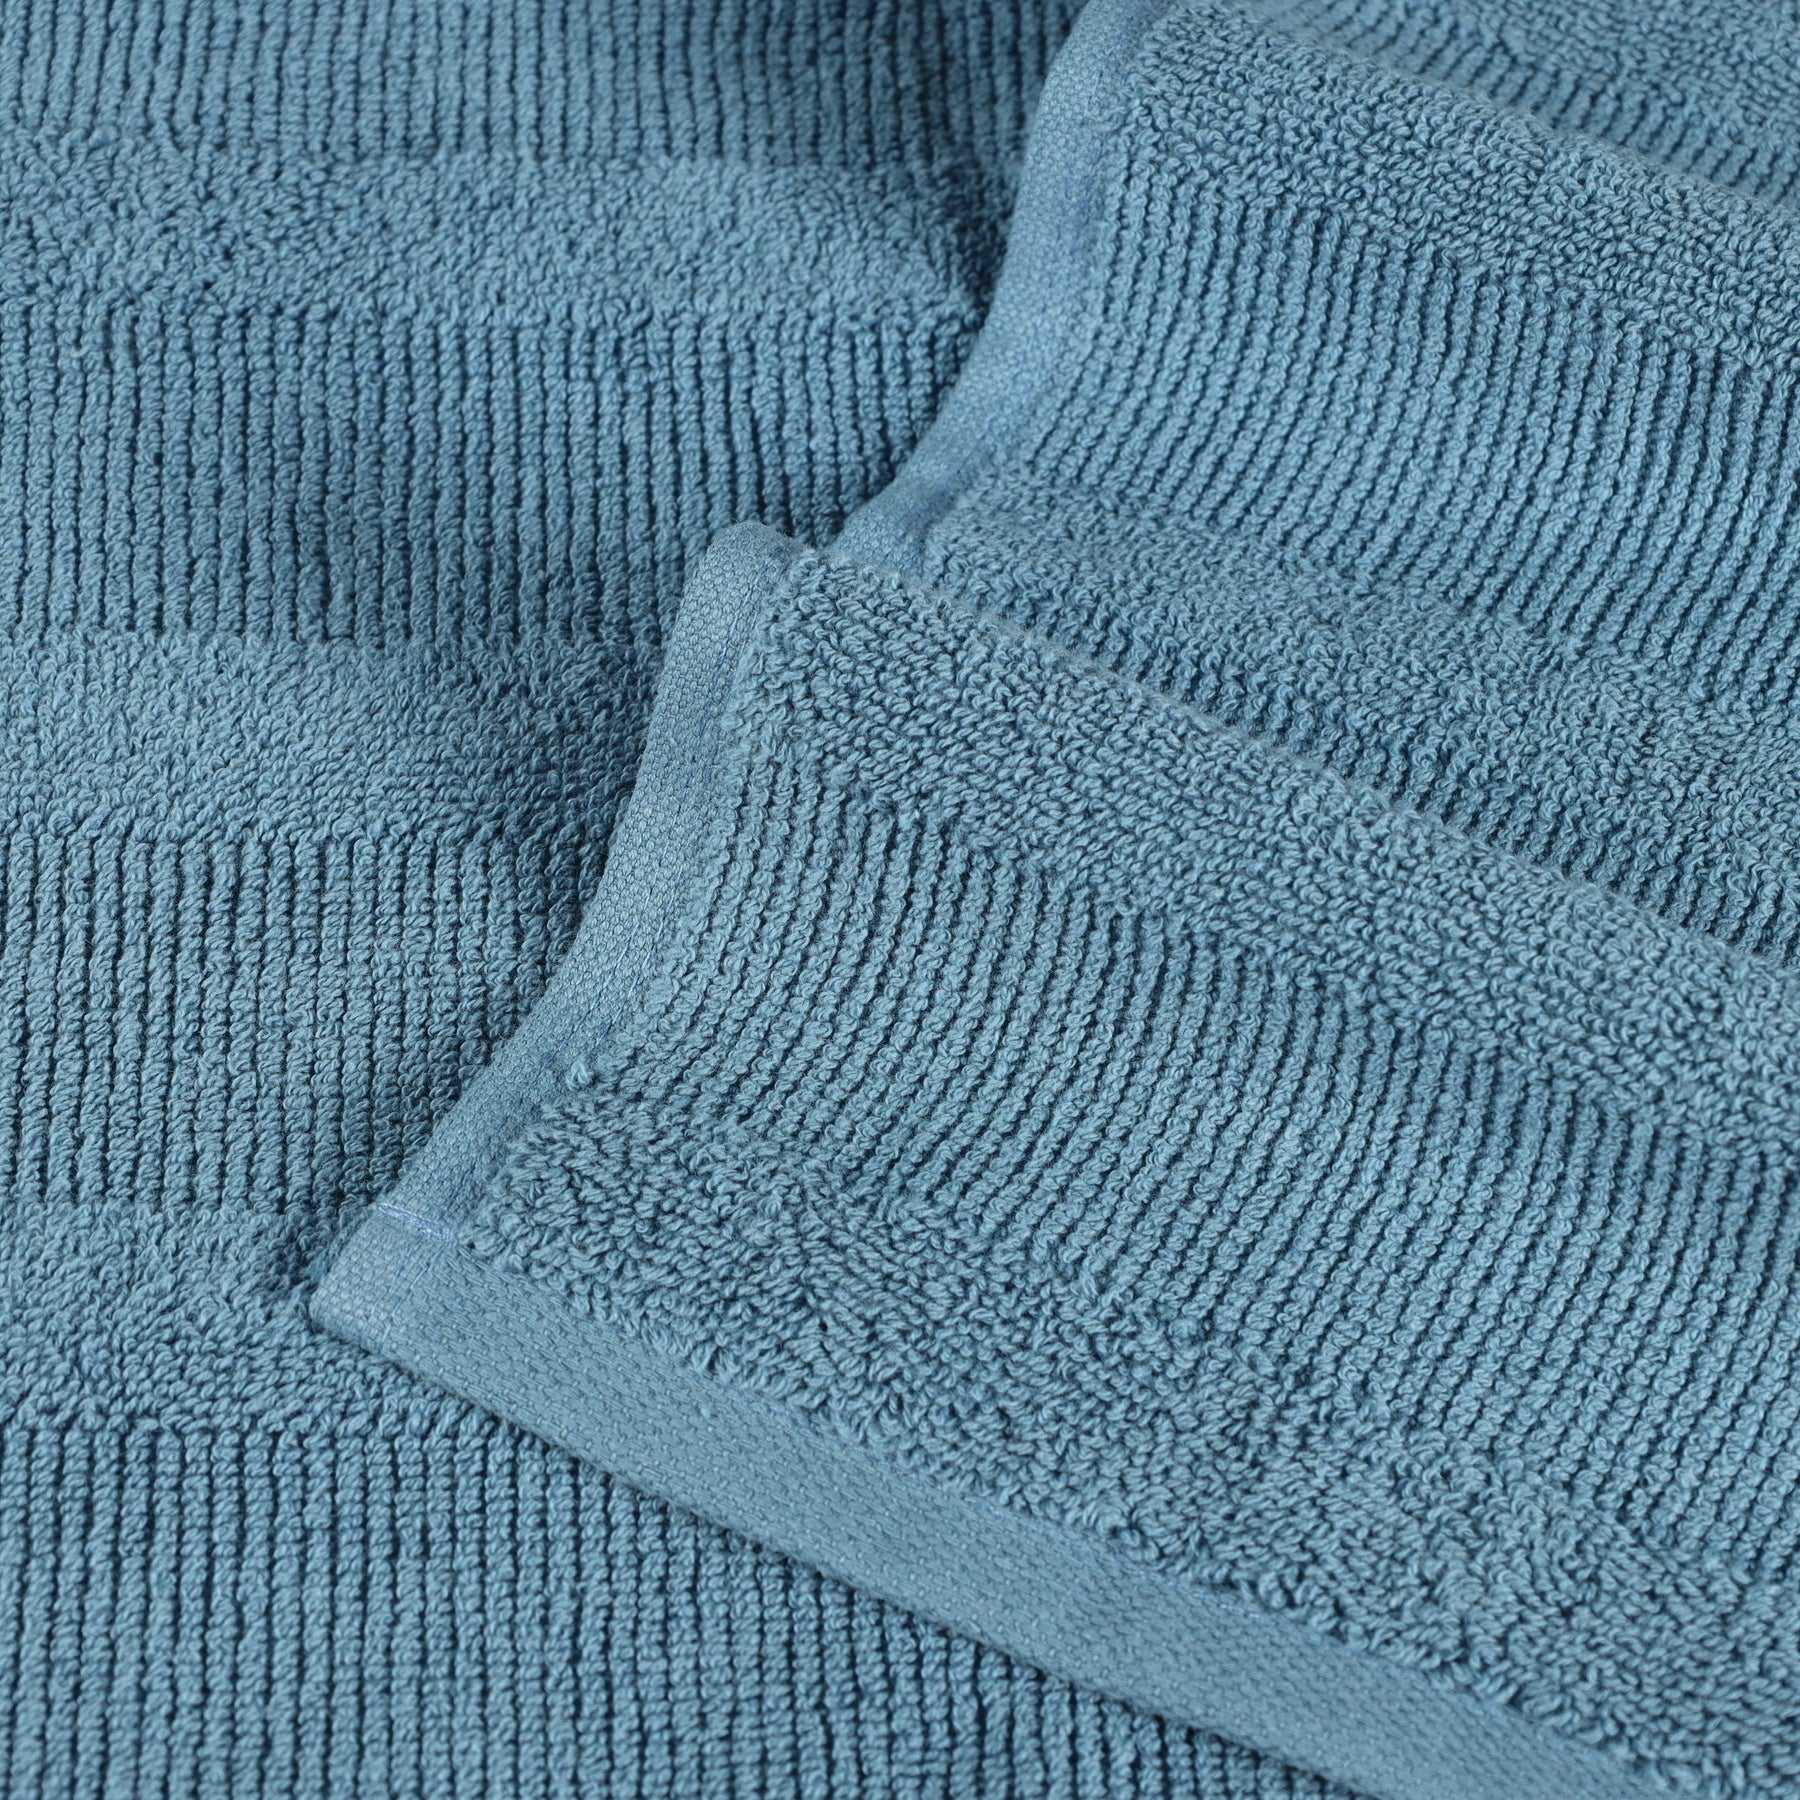 Roma Cotton Ribbed Textured Soft Face Towels/ Washcloths - Denim Blue